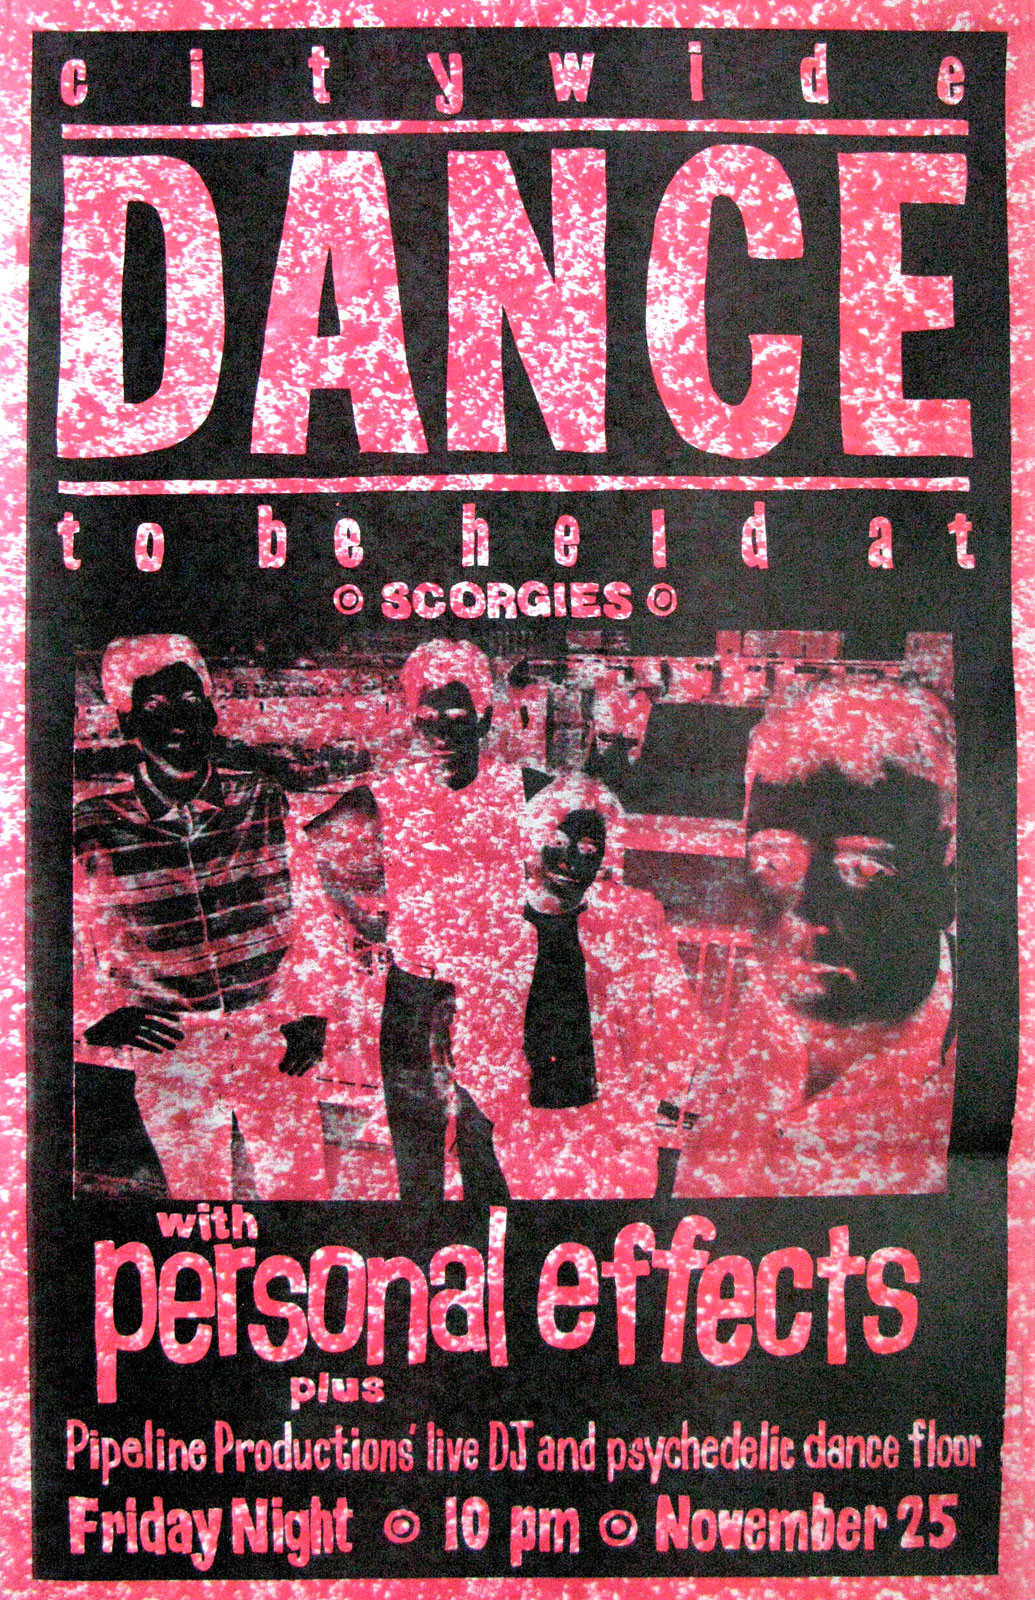 Poster for Personal Effects with Pipeline Productions at Scorgies in Rochester, New York on 11.25.83. Chris Schepp had a hand in the reverse/color field look of this poster and he printed it at Midtown Printing.